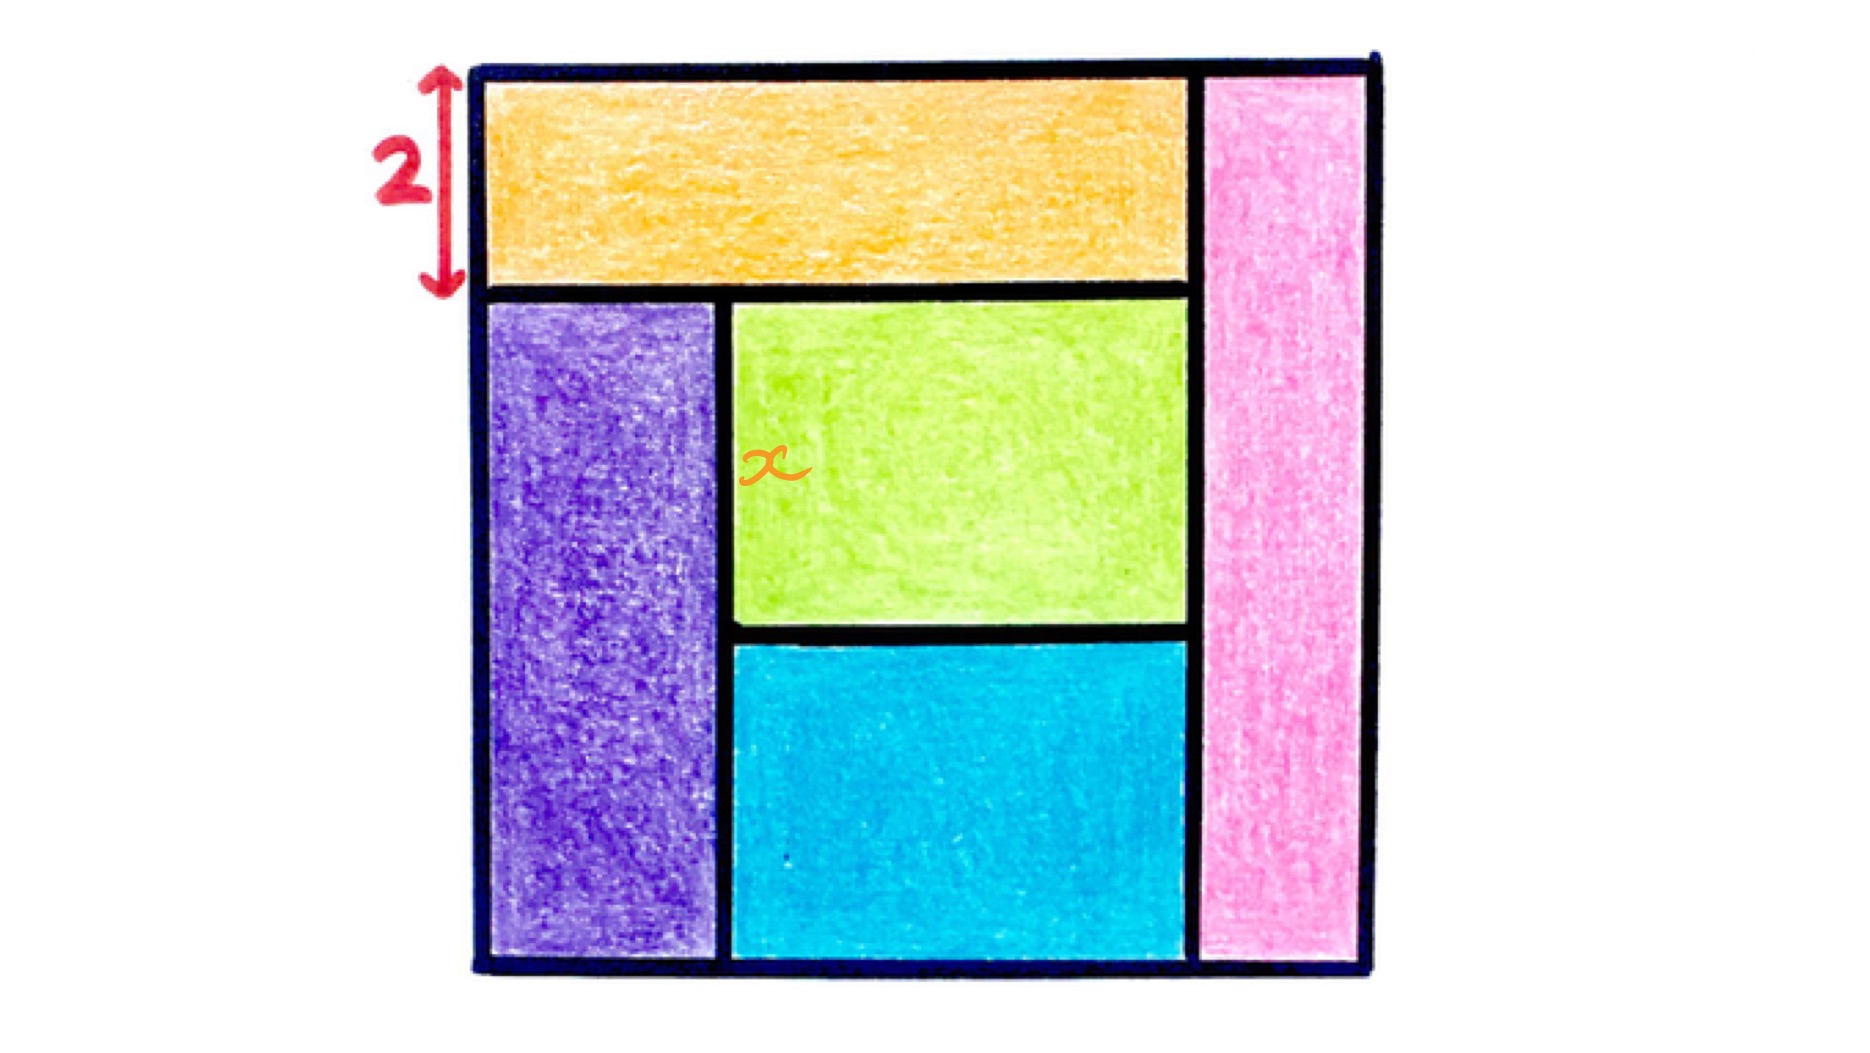 Five rectangles tiling a square labelled